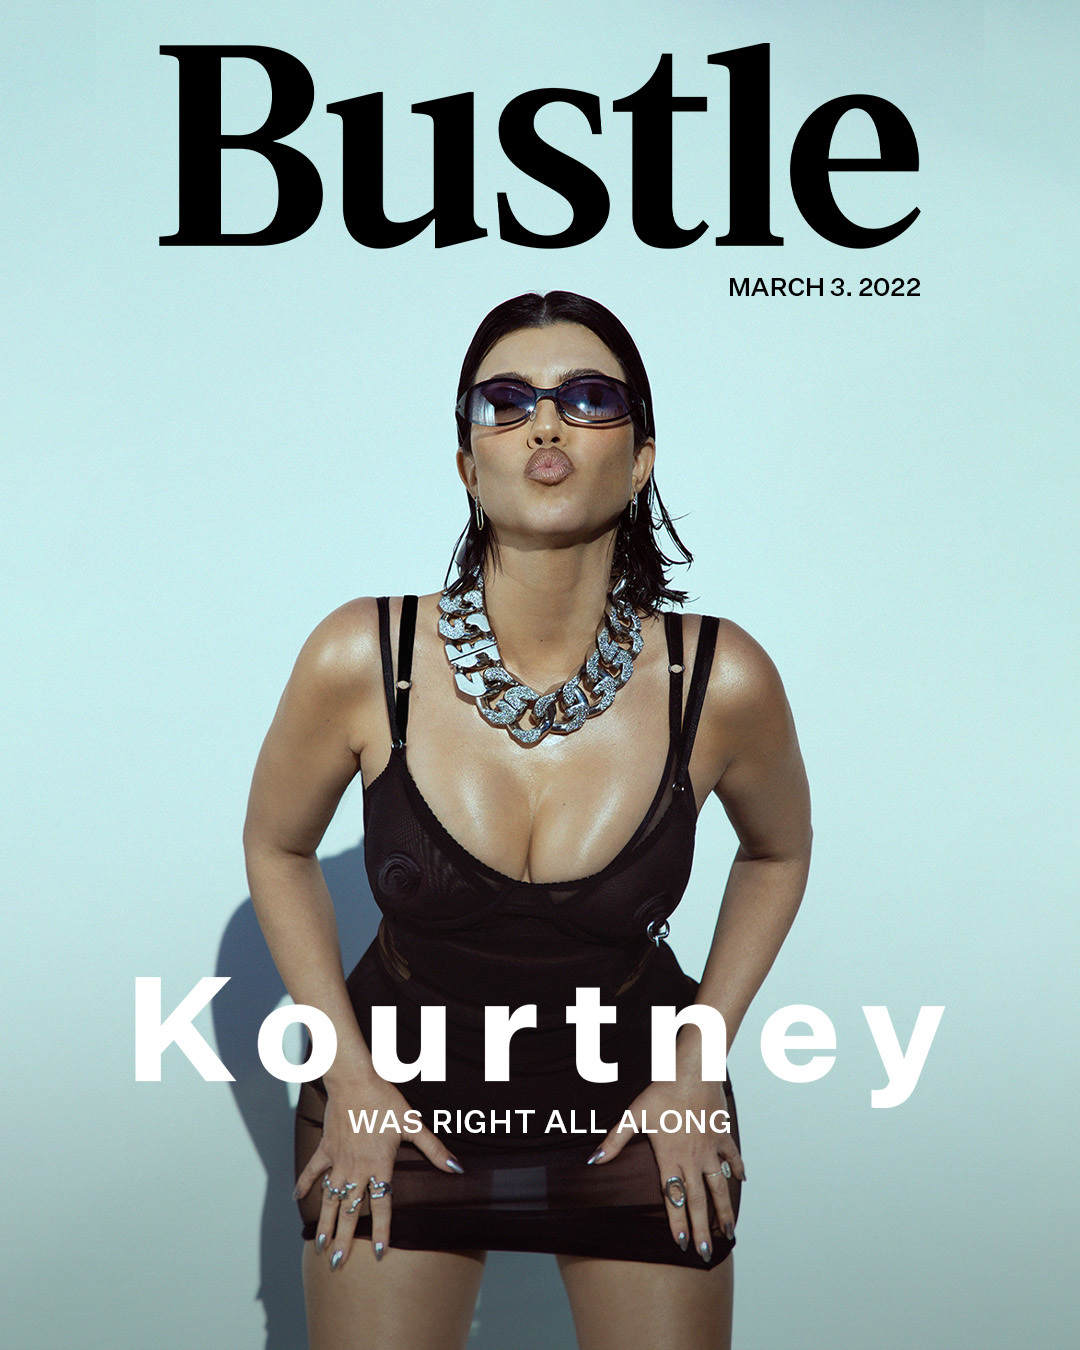 Bustle “Kourtney Was Right All Along” March 3, 2022